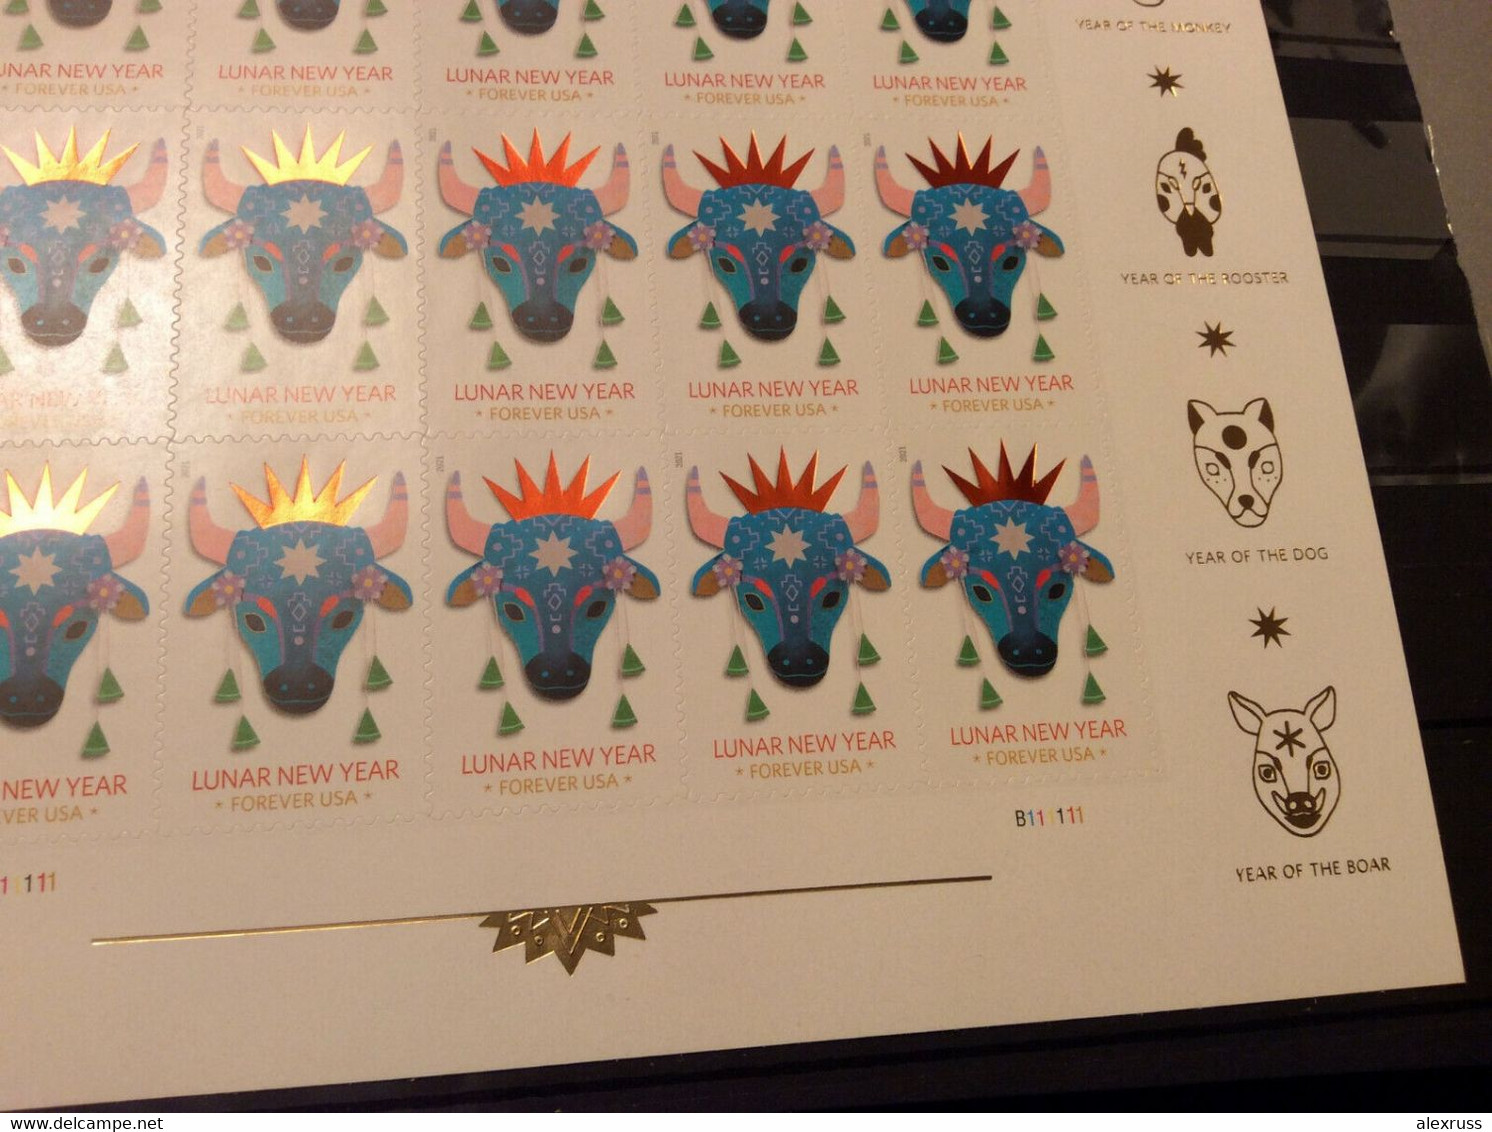 US 2021 Chinese Lunar New Year Series: Year Of The Ox, Sheet Of 20 Forever Stamps, Special Print, VF MNH**,,See Pics !! - Unused Stamps